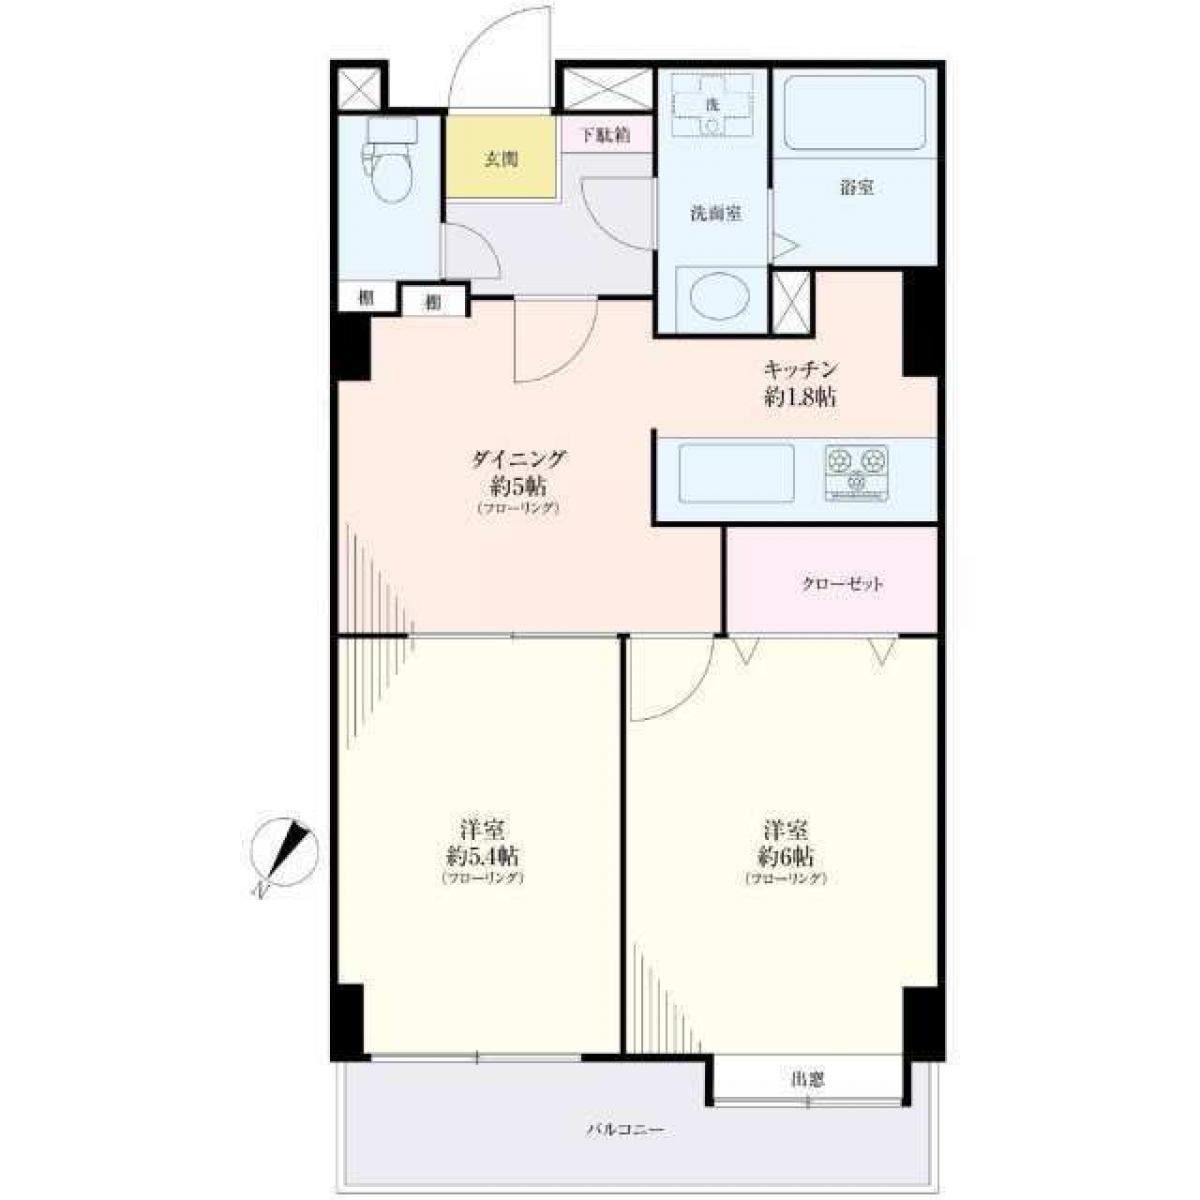 Picture of Apartment For Sale in Nerima Ku, Tokyo, Japan